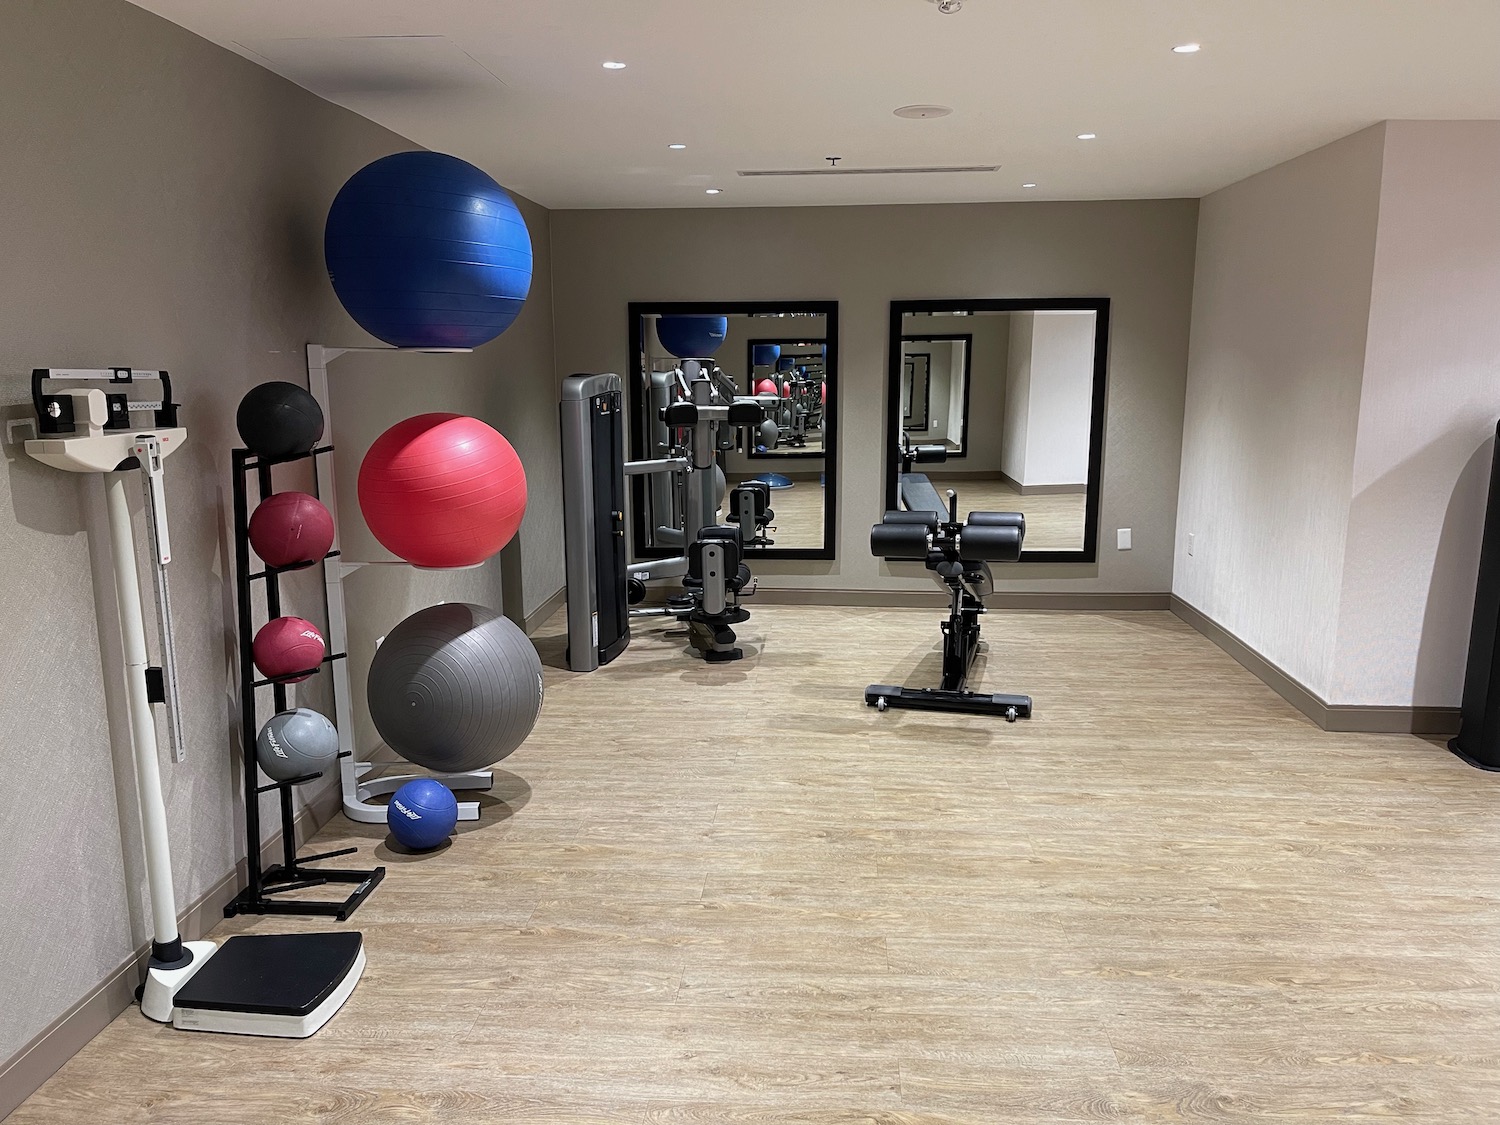 a room with exercise equipment and exercise equipment